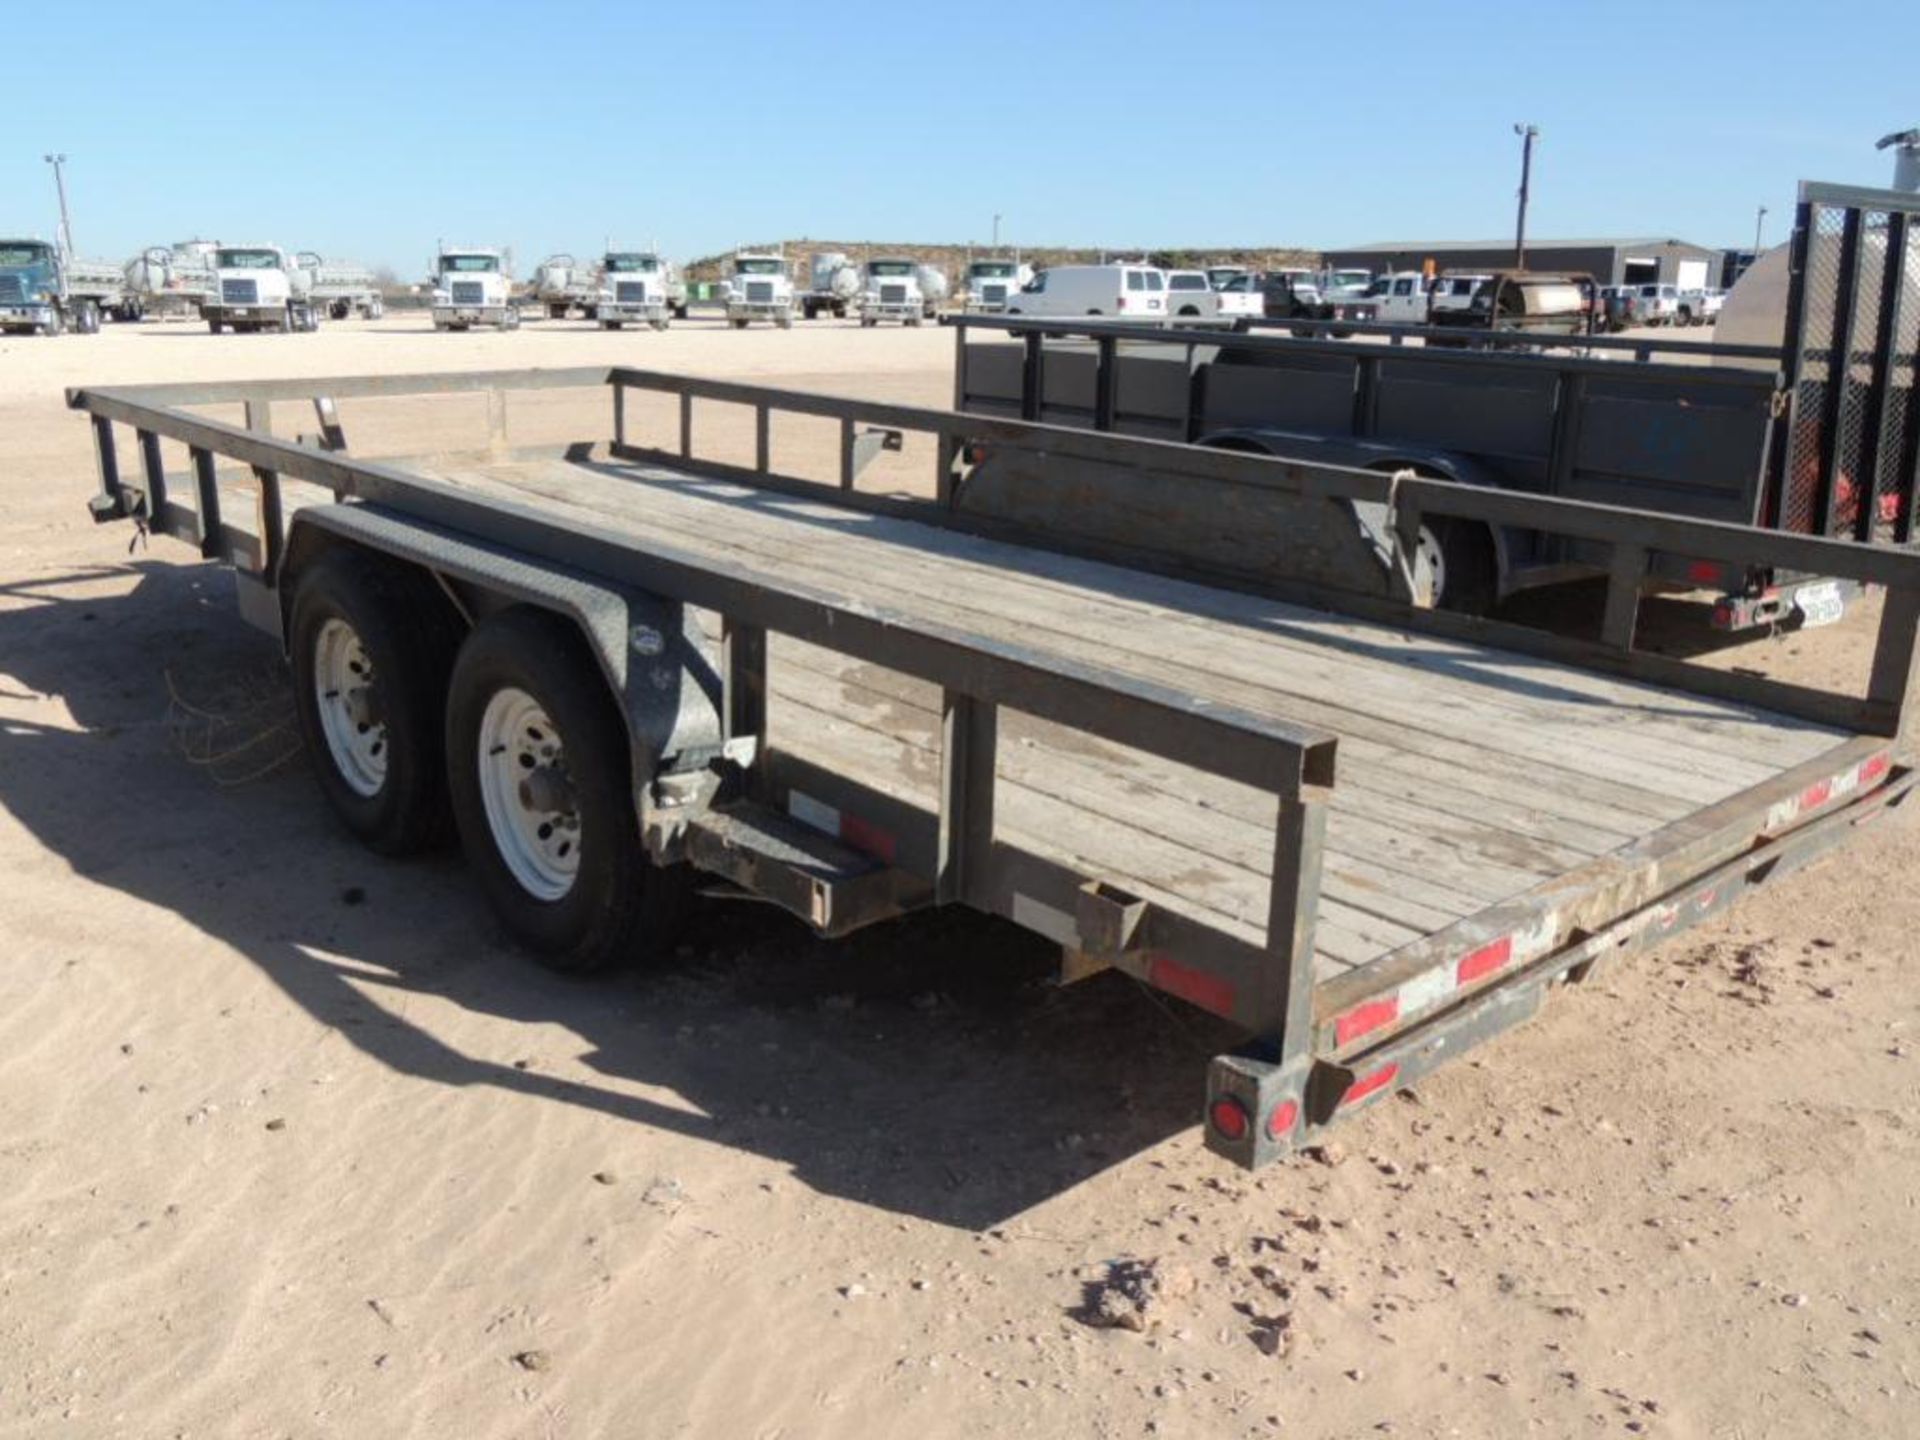 2014 Big Tex Model 14PI-18GY T/A Utility Trailer, VIN 16VPX1828E2321791, 14K AWR, 7 ft. x18 ft. with - Image 4 of 4